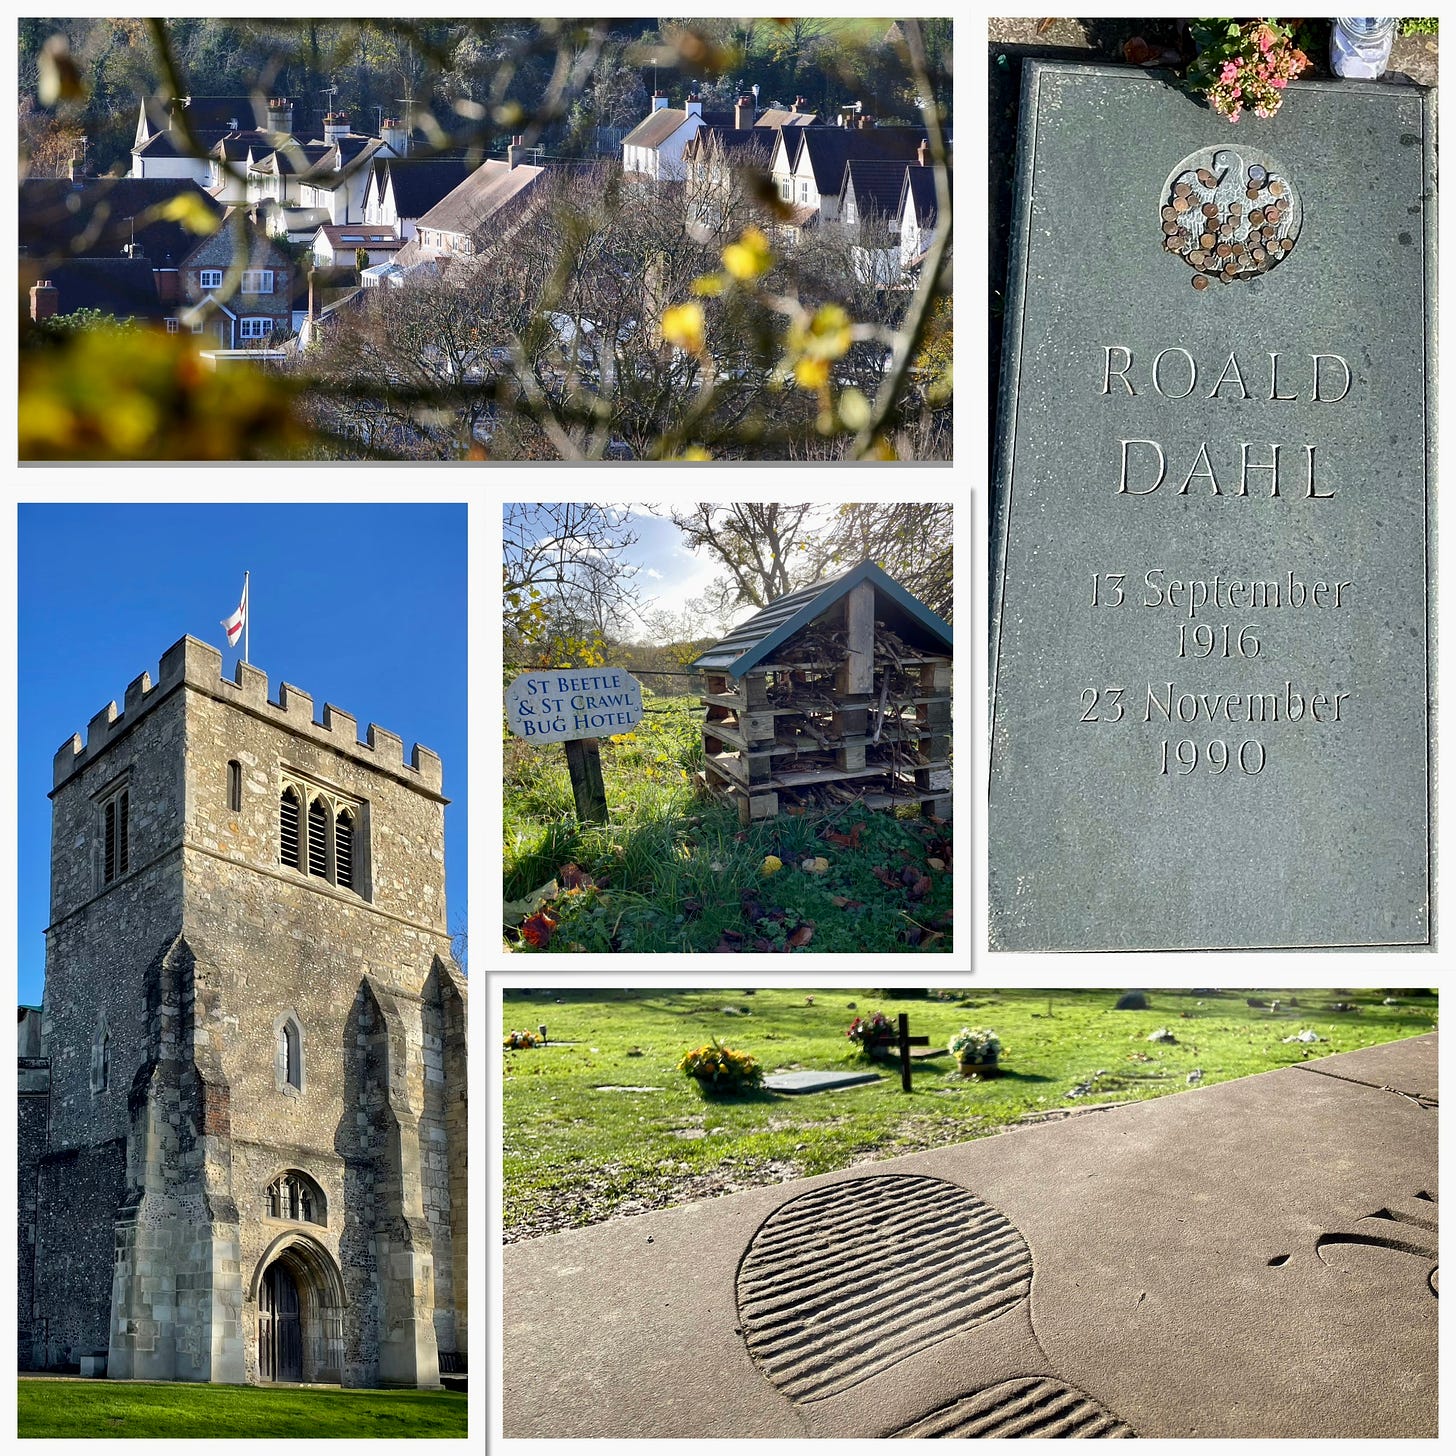 A selection of images from Great Missenden, the church of St Peter & St Paul, a bug hotel and Roald Dahl’s grave. 